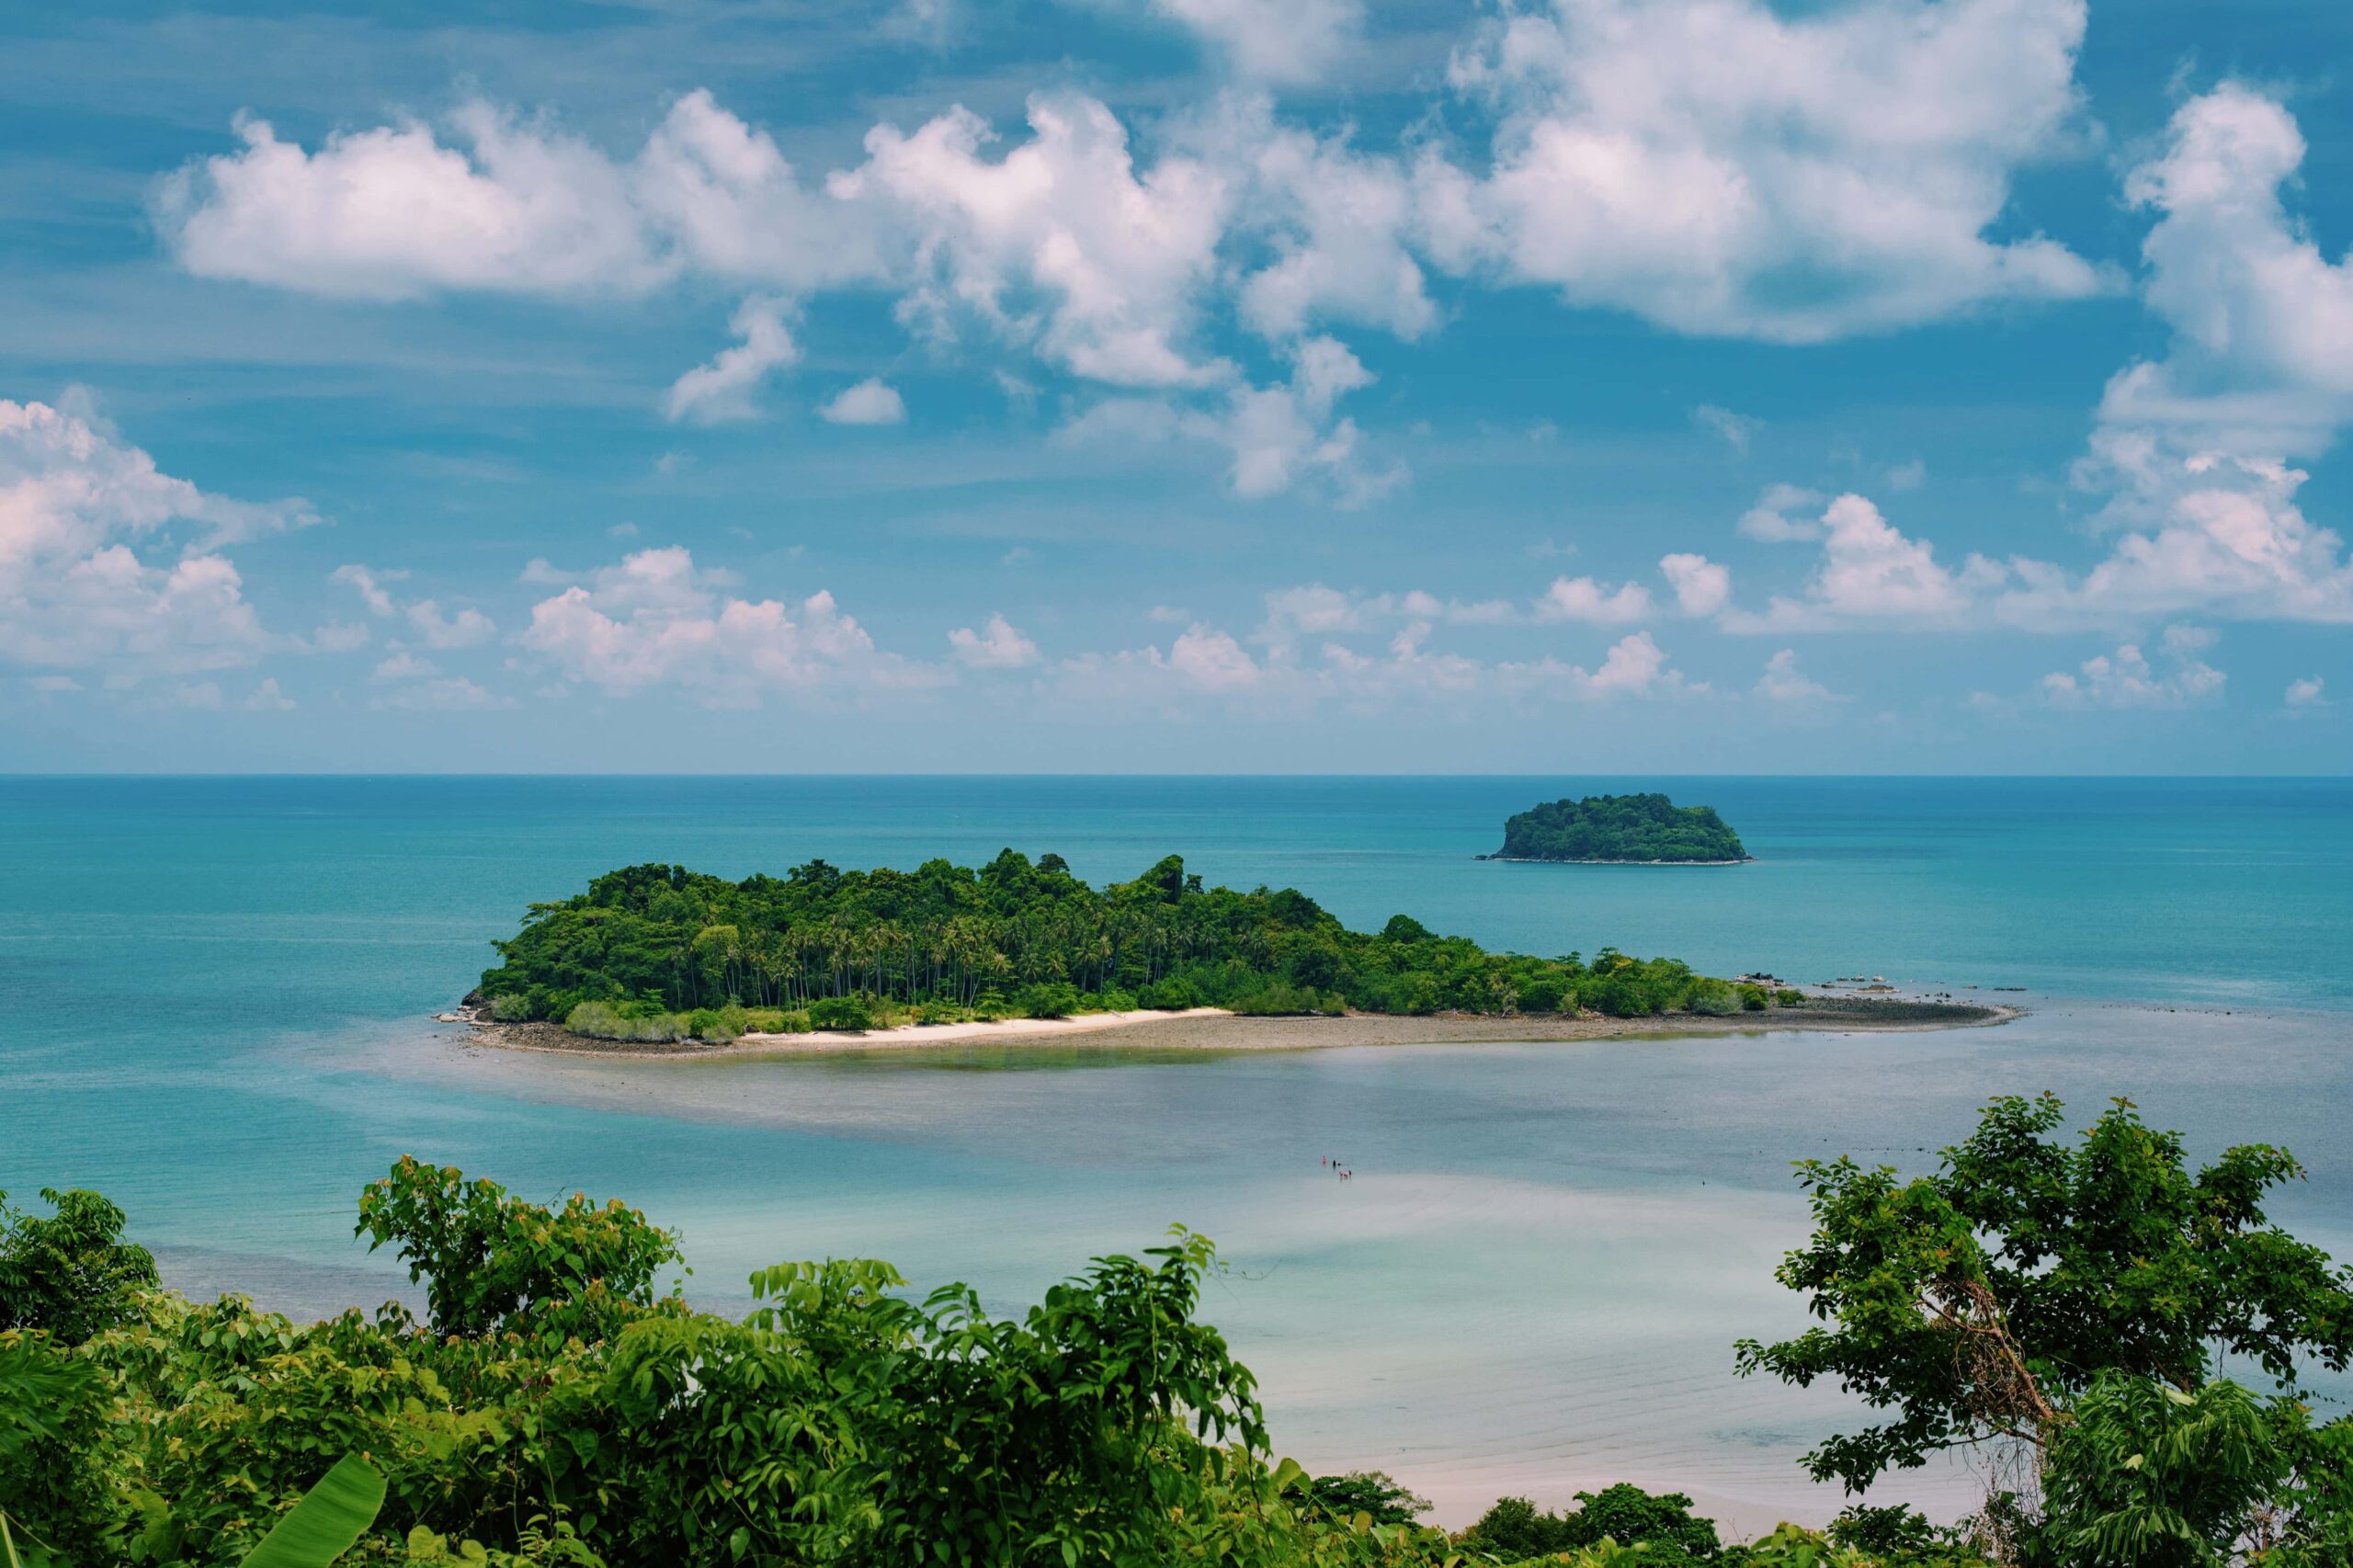 An island of the island of Koh Chang